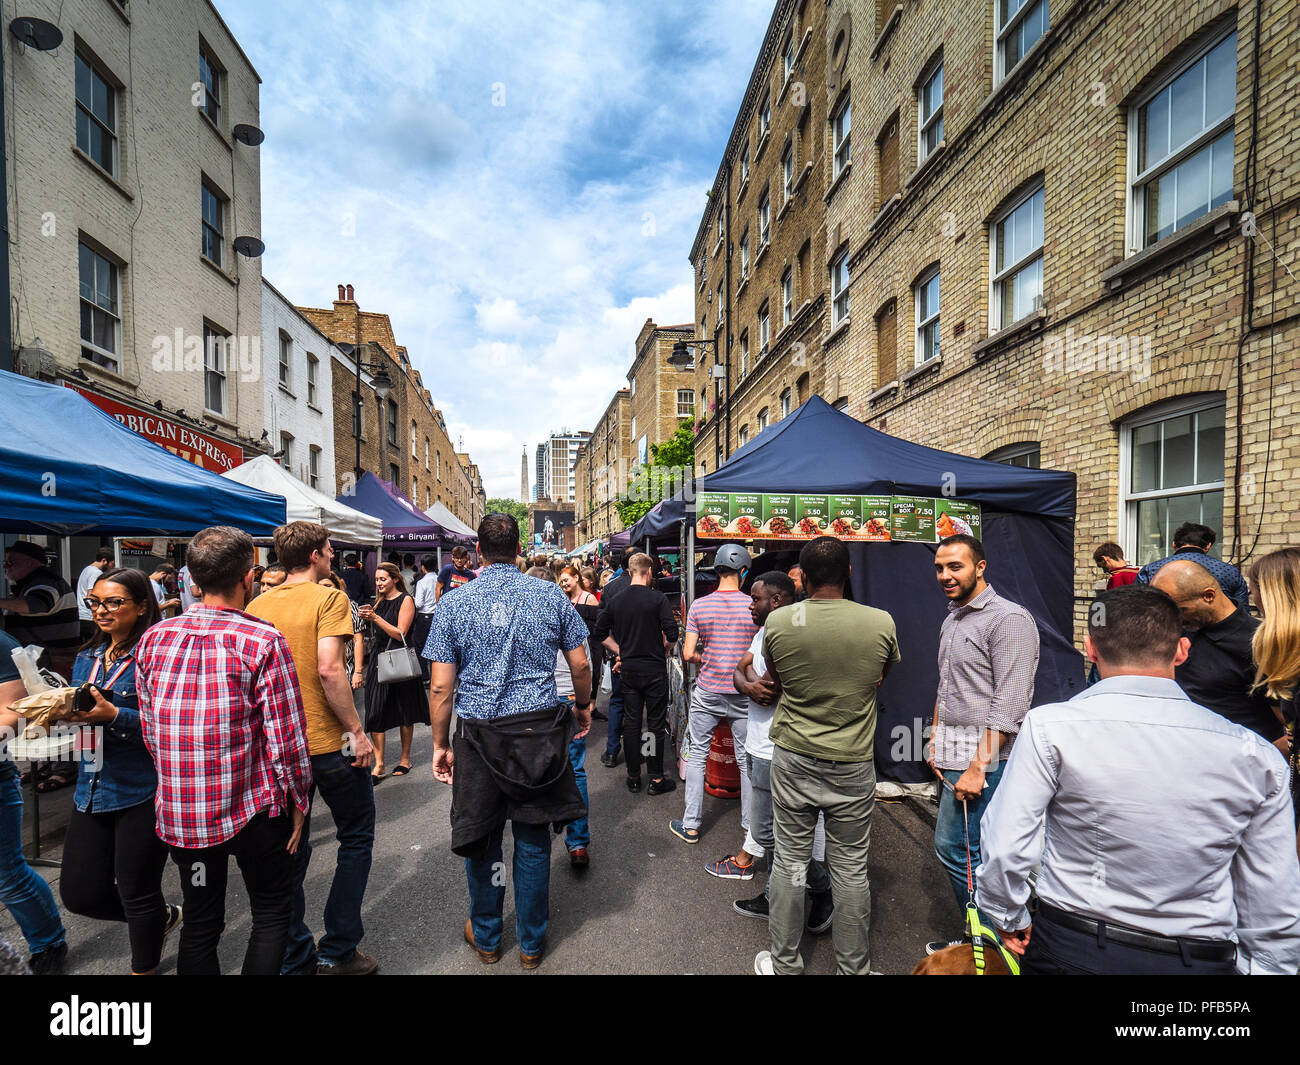 London Street Food Market Whitecross Street - City workers buy lunch at the food stalls on Whitecross Street near the Barbican London Stock Photo